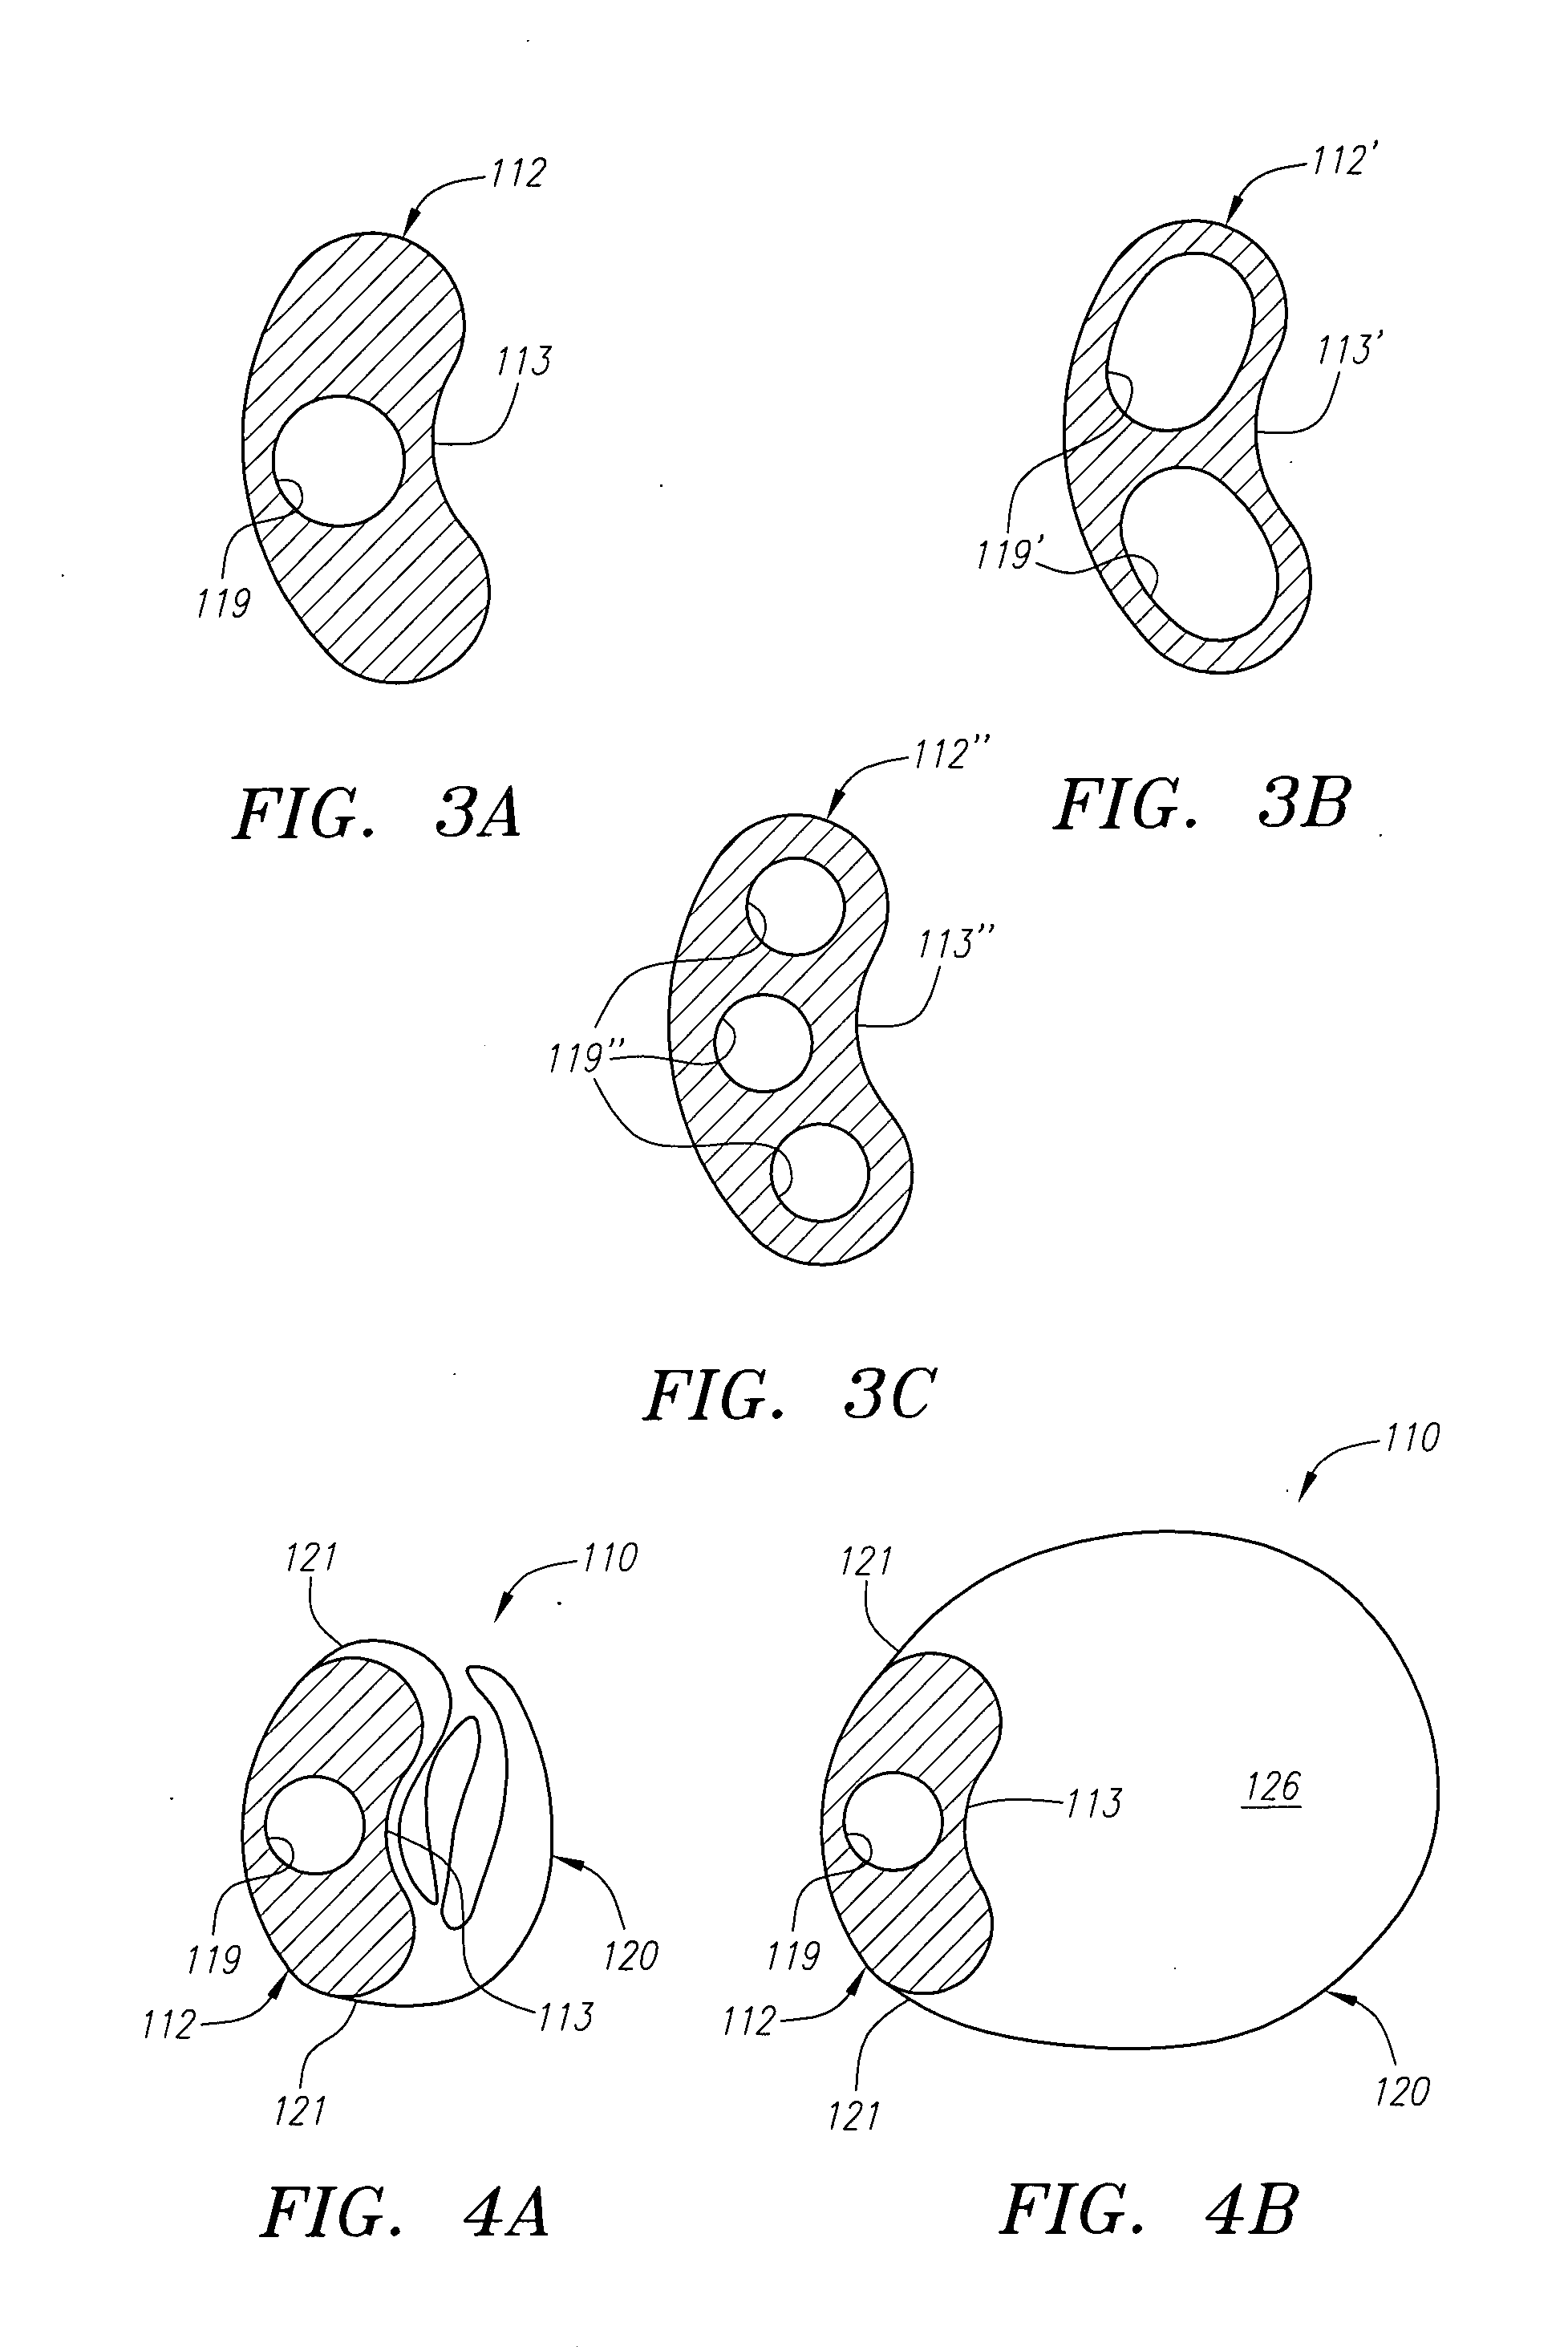 Expandable guide sheath and apparatus with distal protection and methods for use